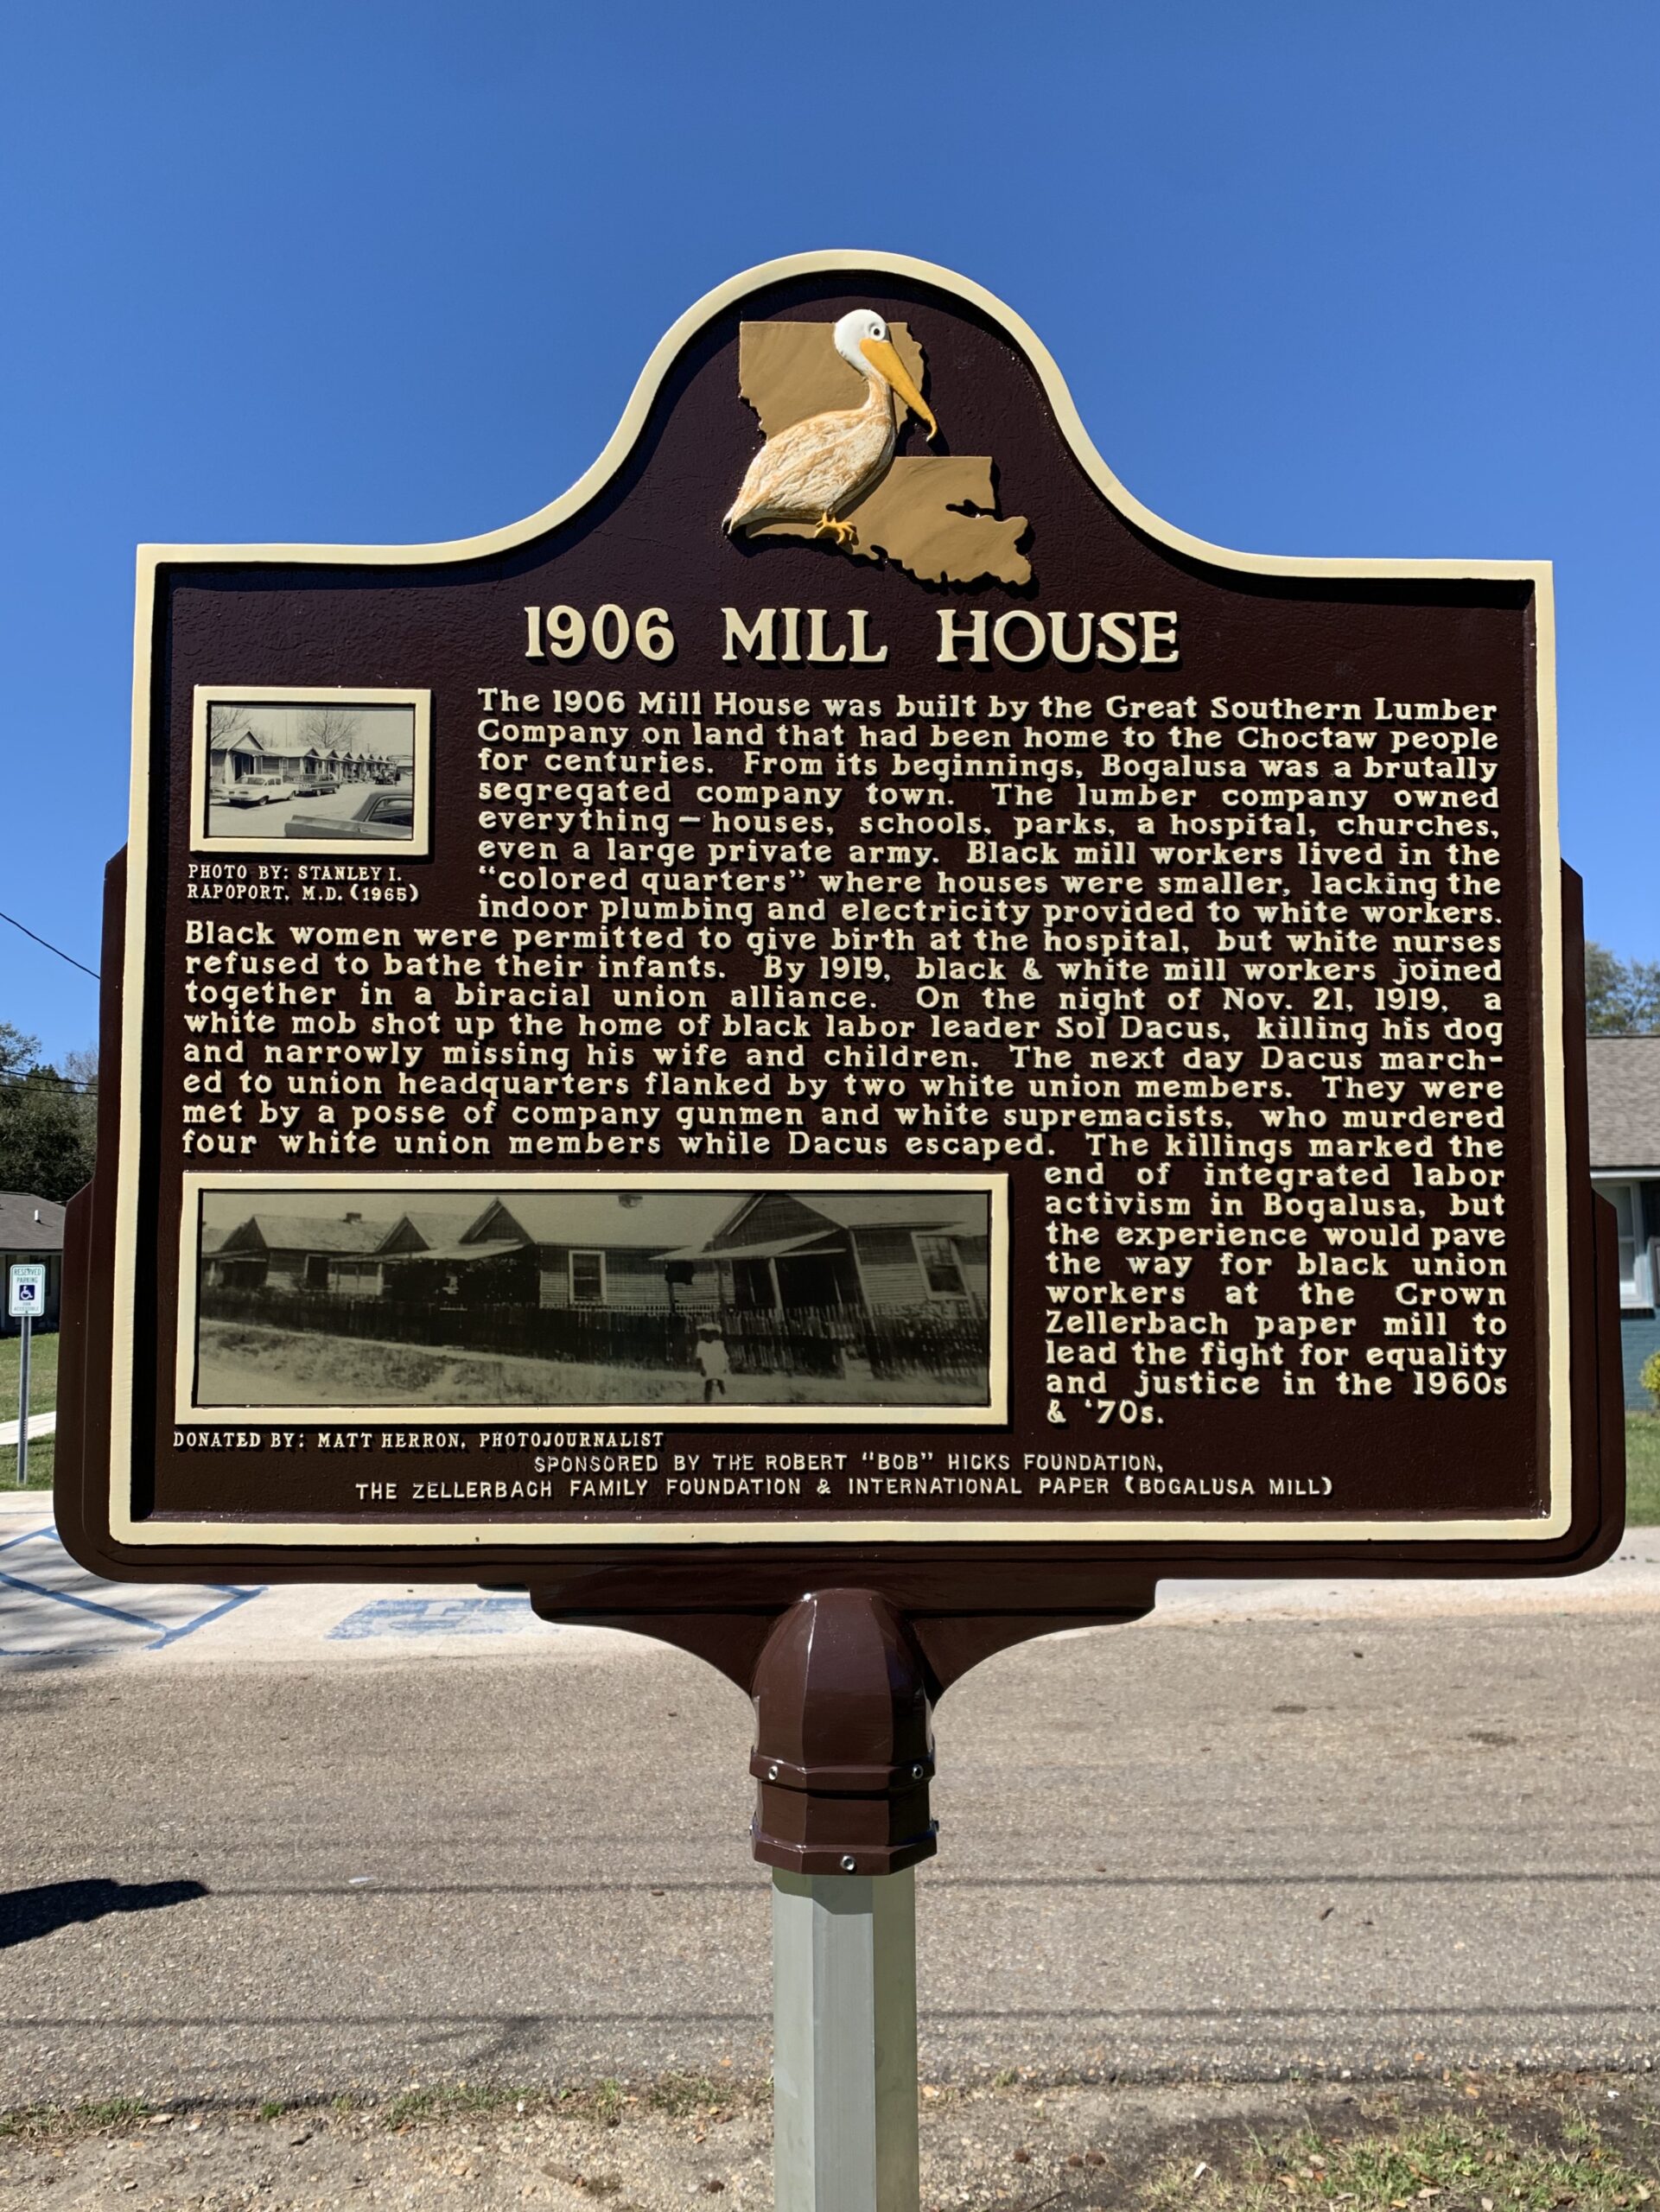 Back of 1906 Mill House historic marker with text describing the history of segregated mill houses in Bogalusa, Louisiana